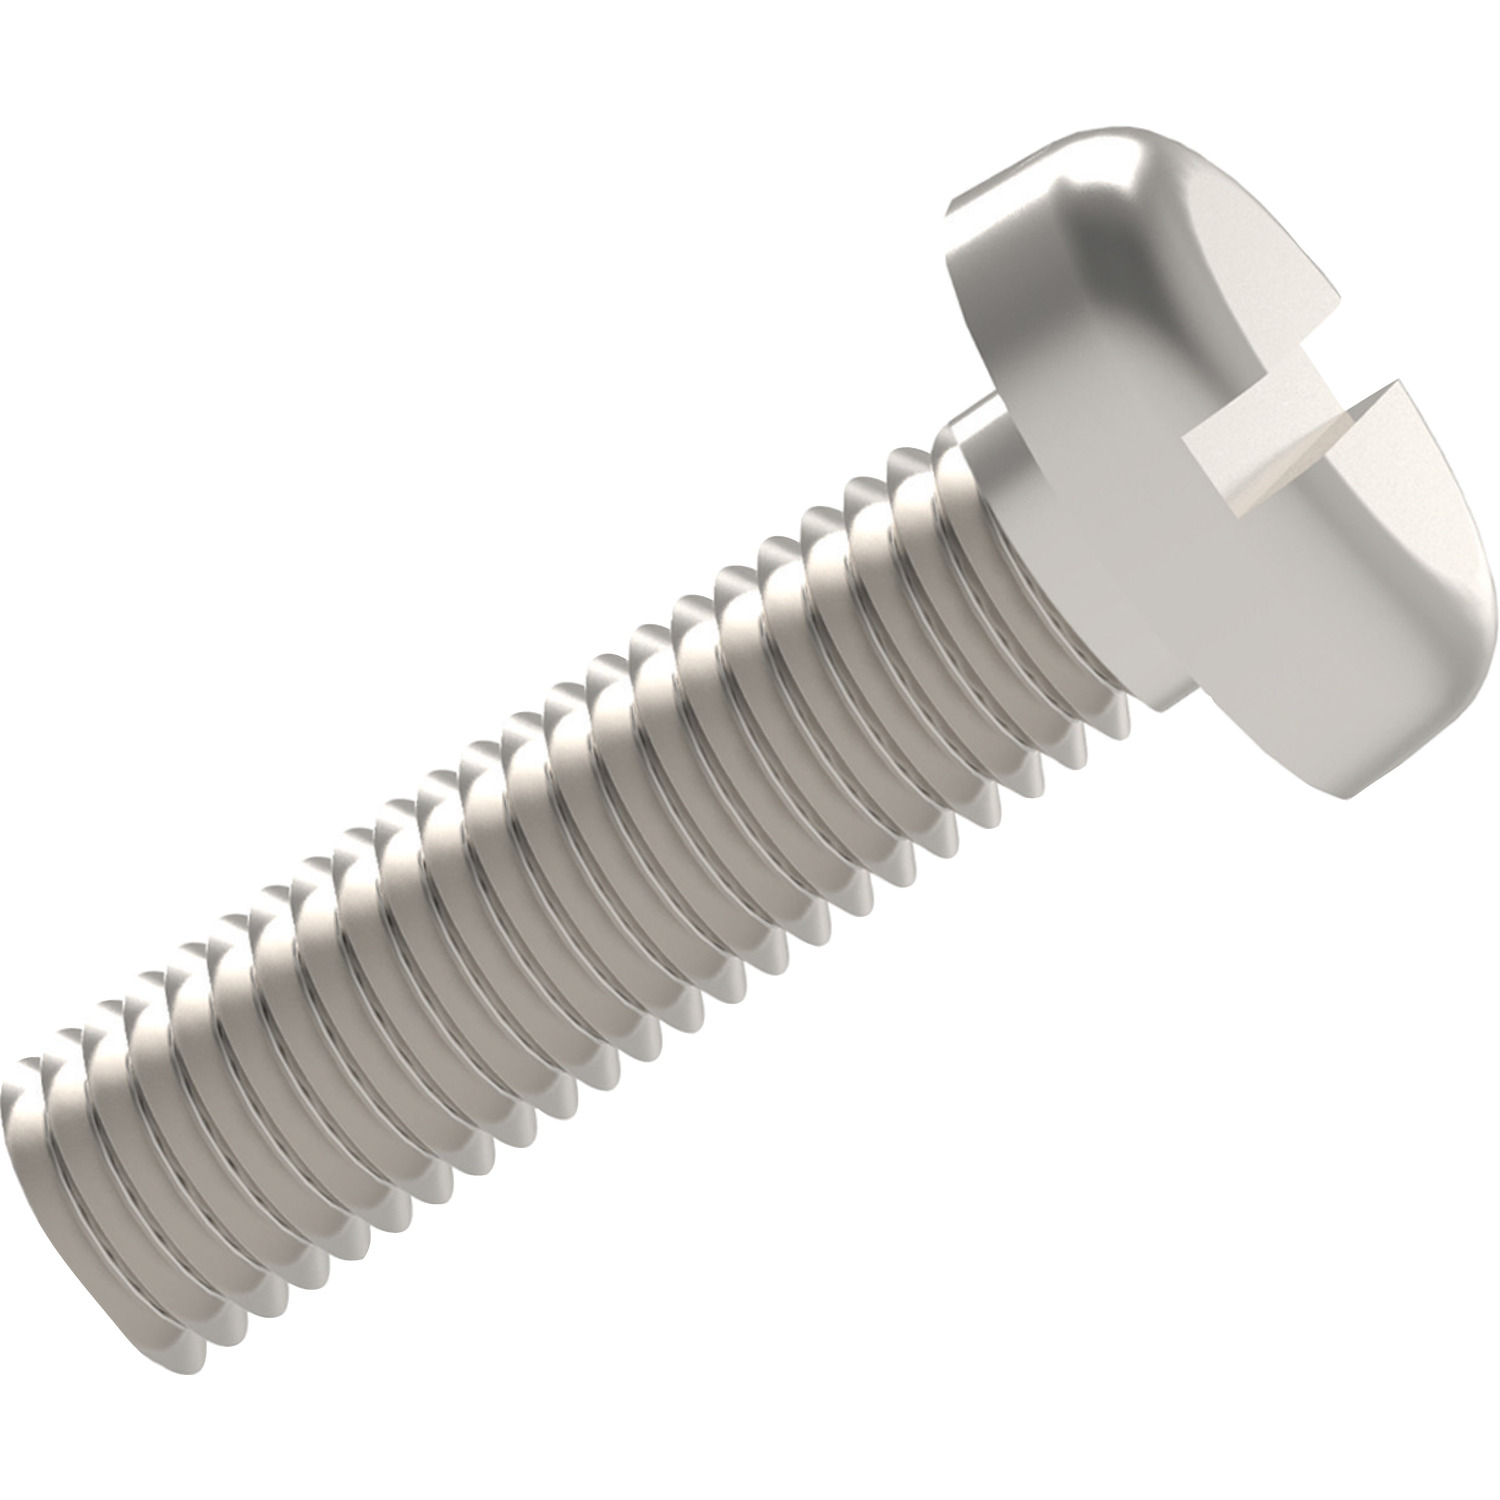 Slot Pan Head Screws To DIN 85, ISO 1580. Threaded within 2,5 x pitch of head.